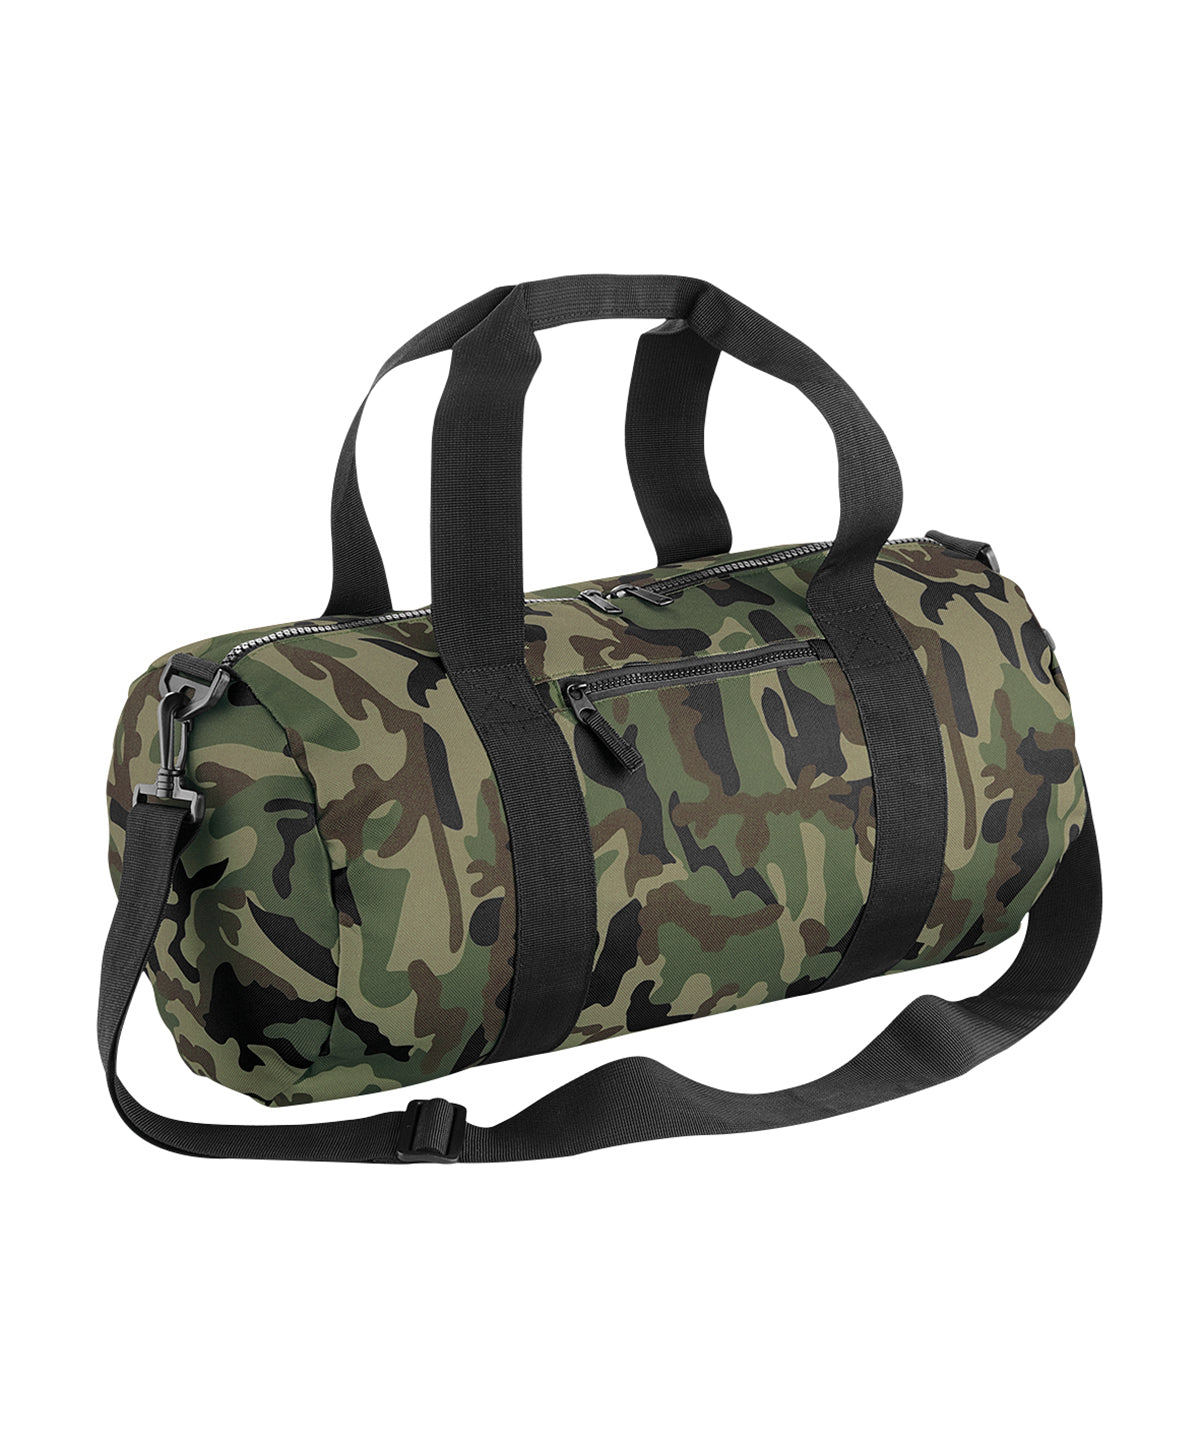 Personalised Bags - Camouflage Bagbase Camo barrel bag